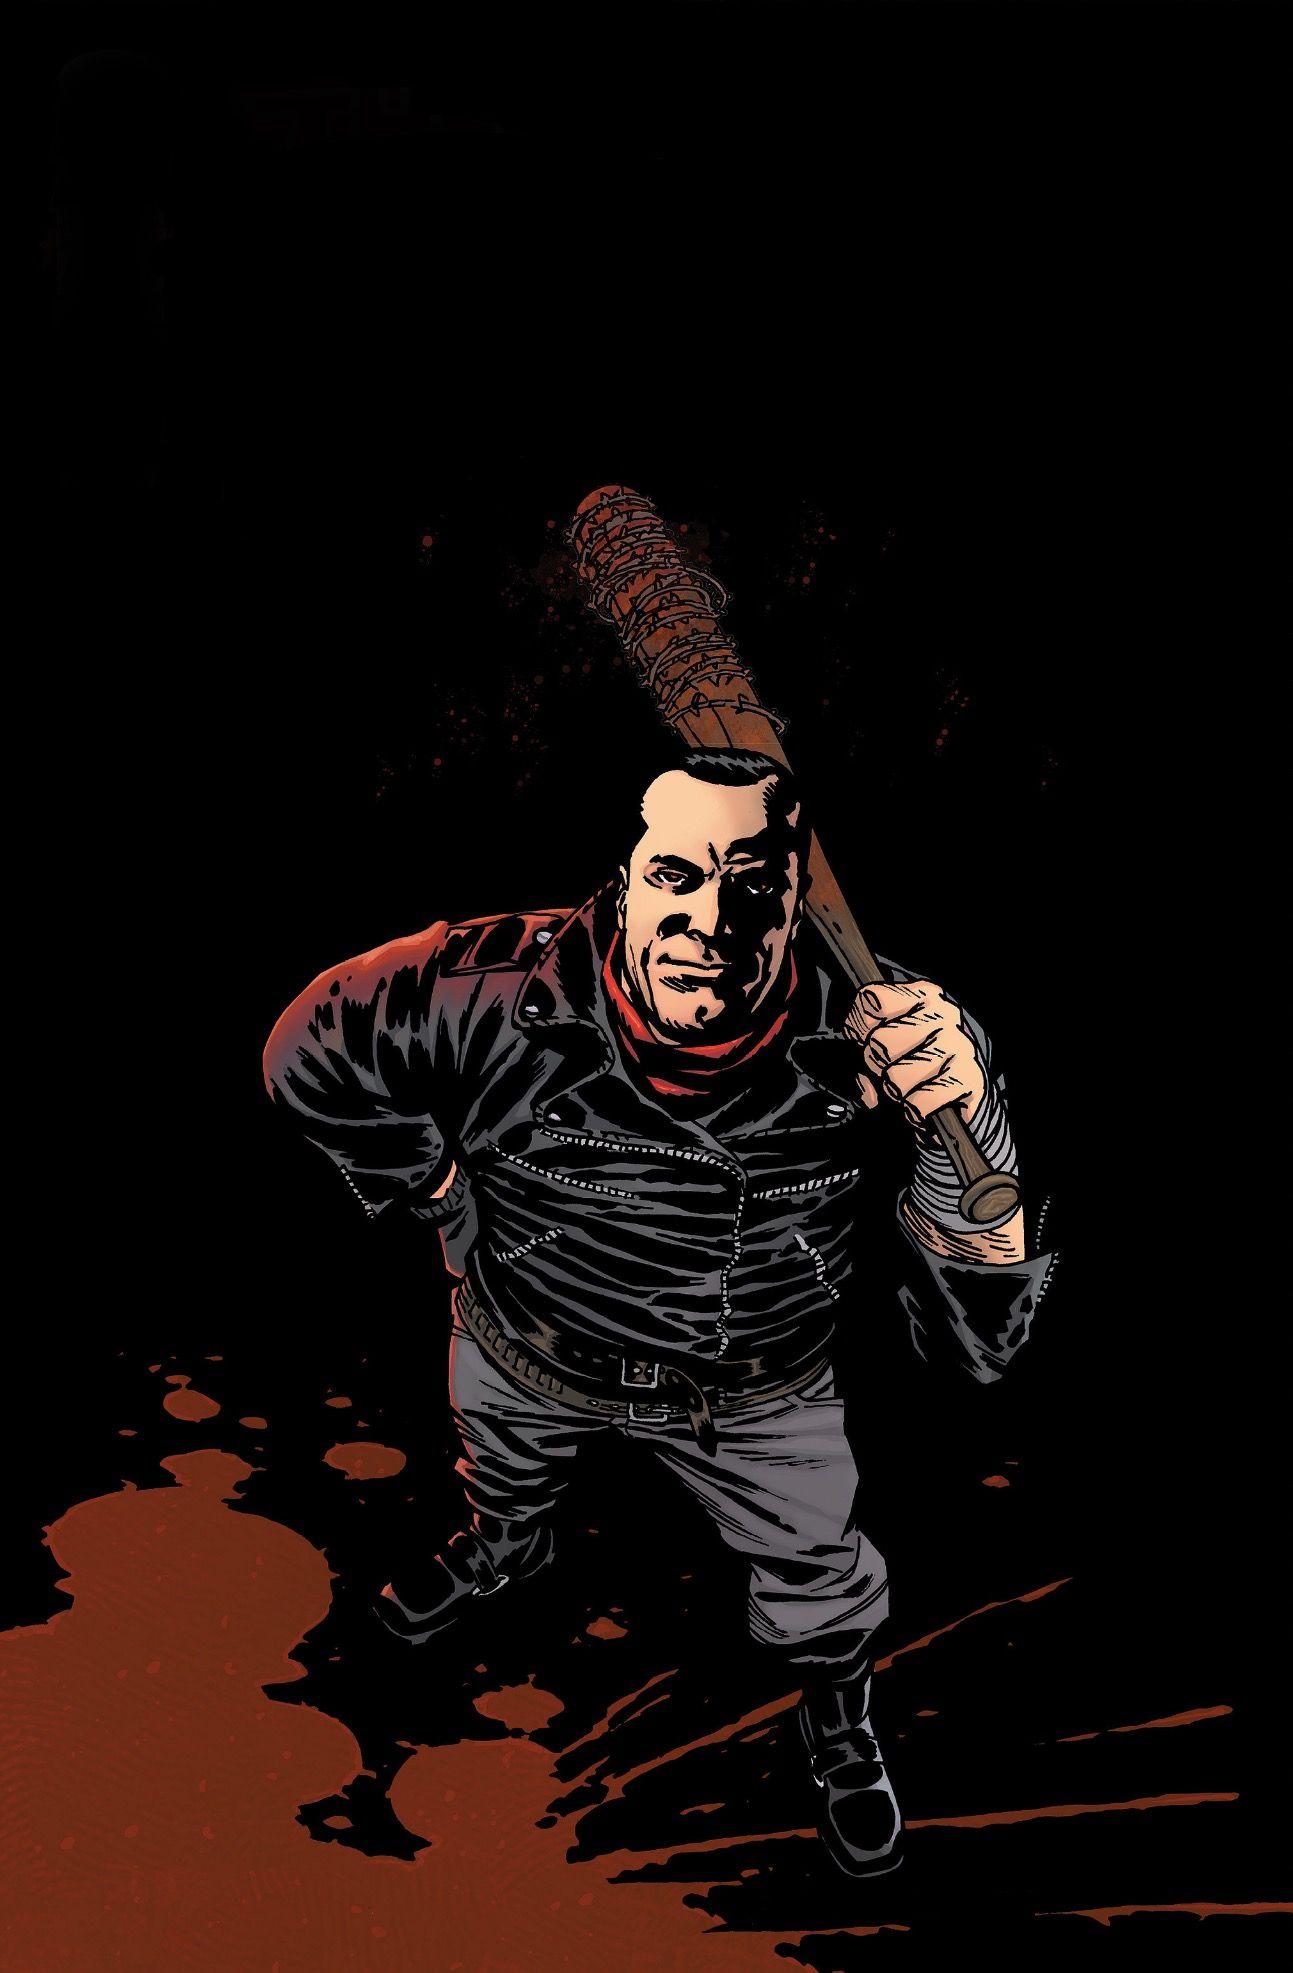 With a little editing I made a phone wallpaper of Negan from